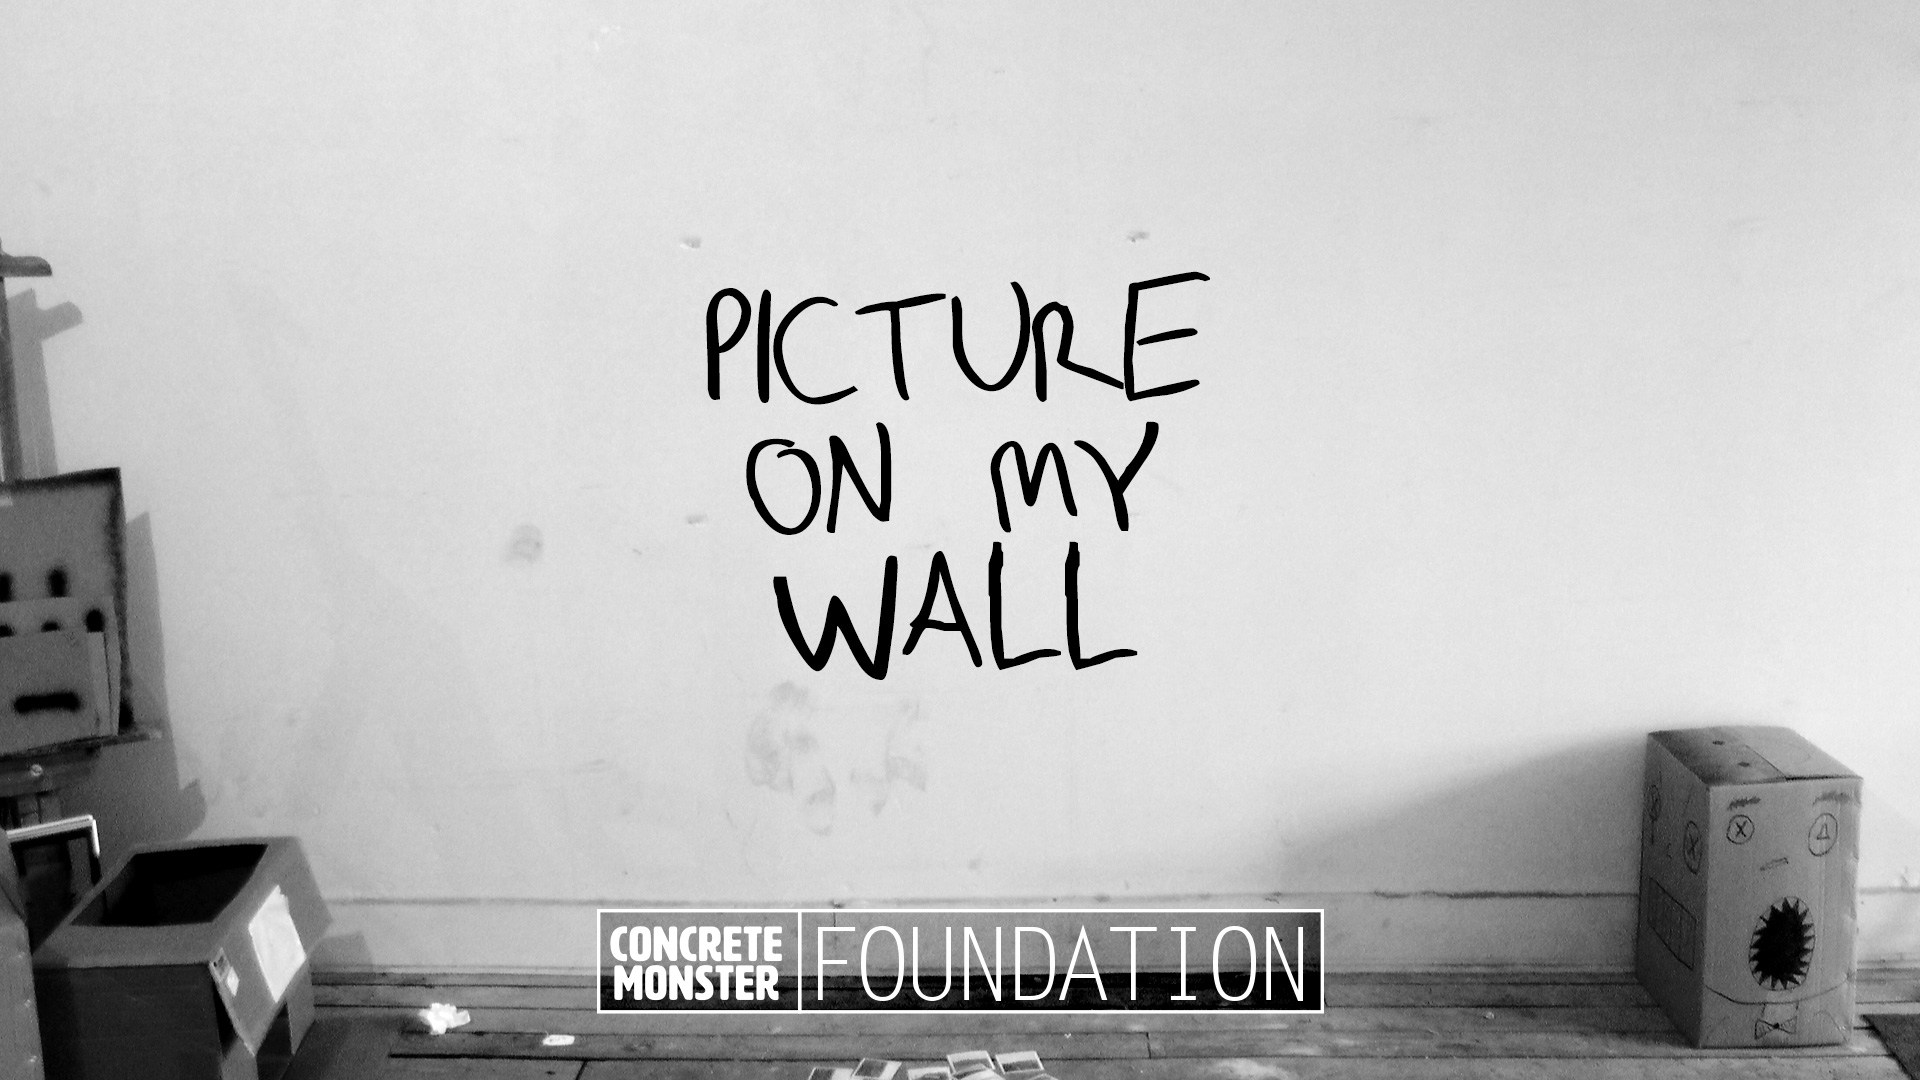 picture on my wall foundation ep 1920 01